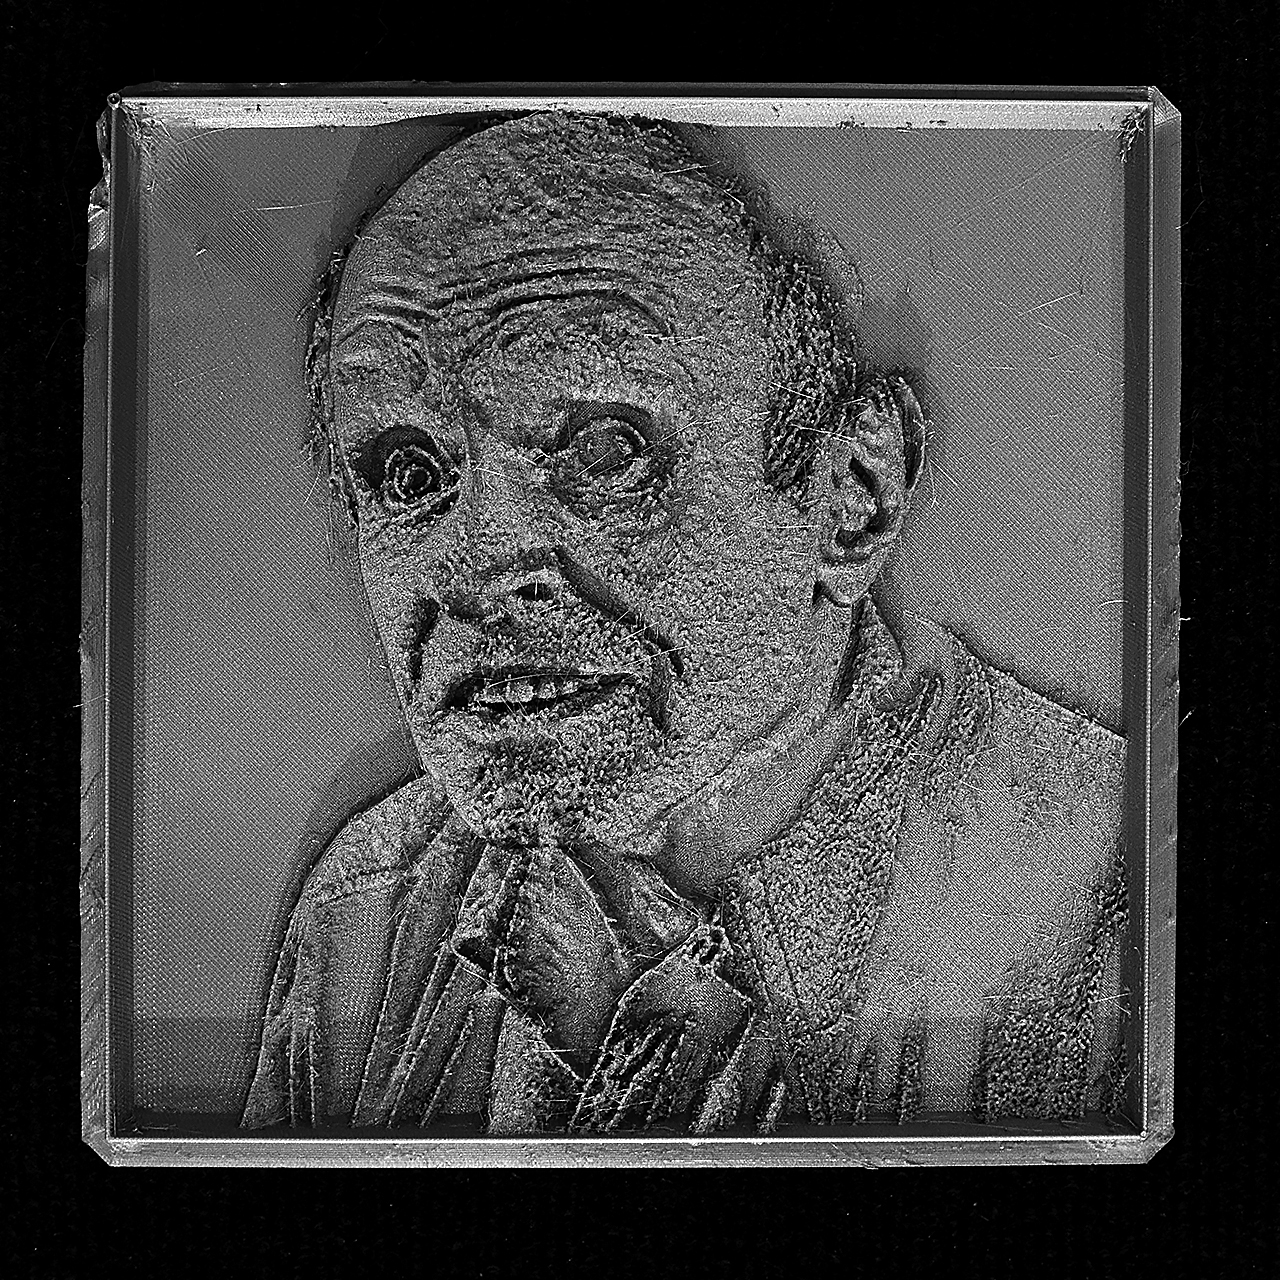 #02 - Portraits for the Visually Impaired, 3D Printed Relief